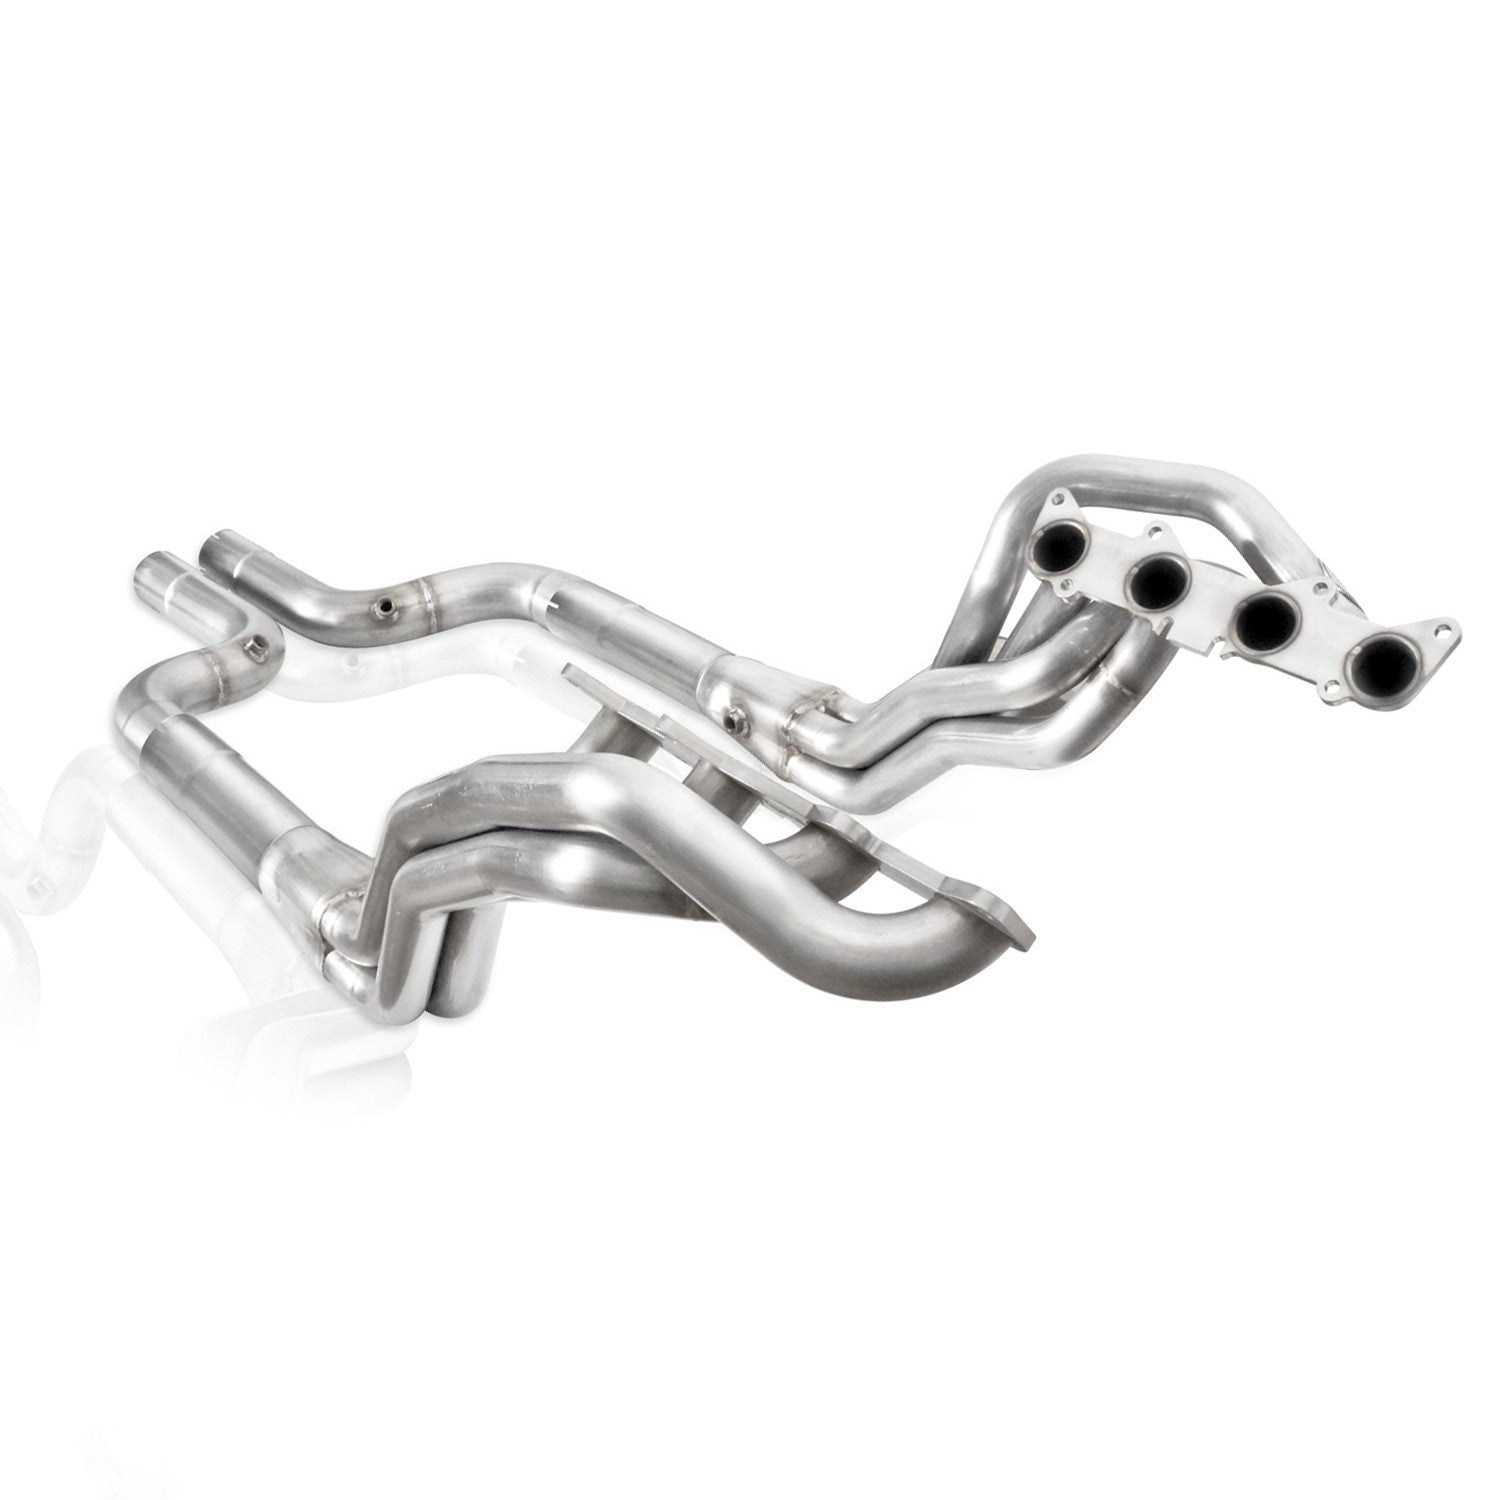 Stainless Works SP Ford Mustang GT 2015-17 Headers 1-7/8" Off-Road Aftermarket Connect SM15H3ORLG